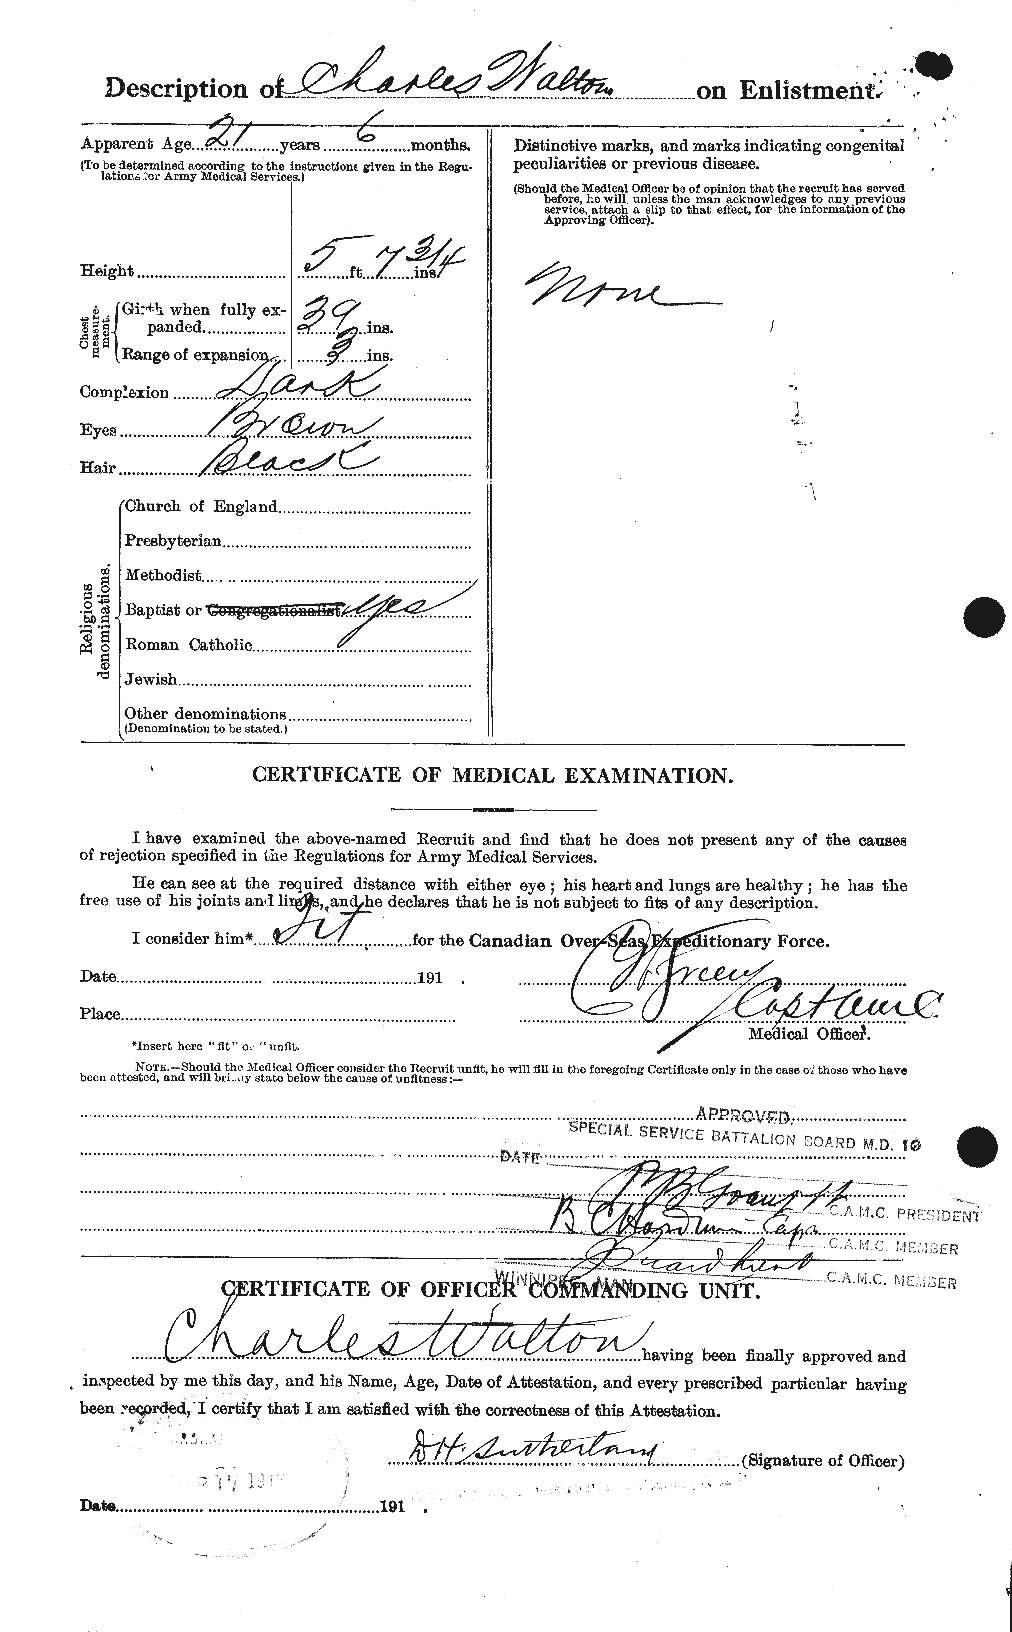 Personnel Records of the First World War - CEF 655527b